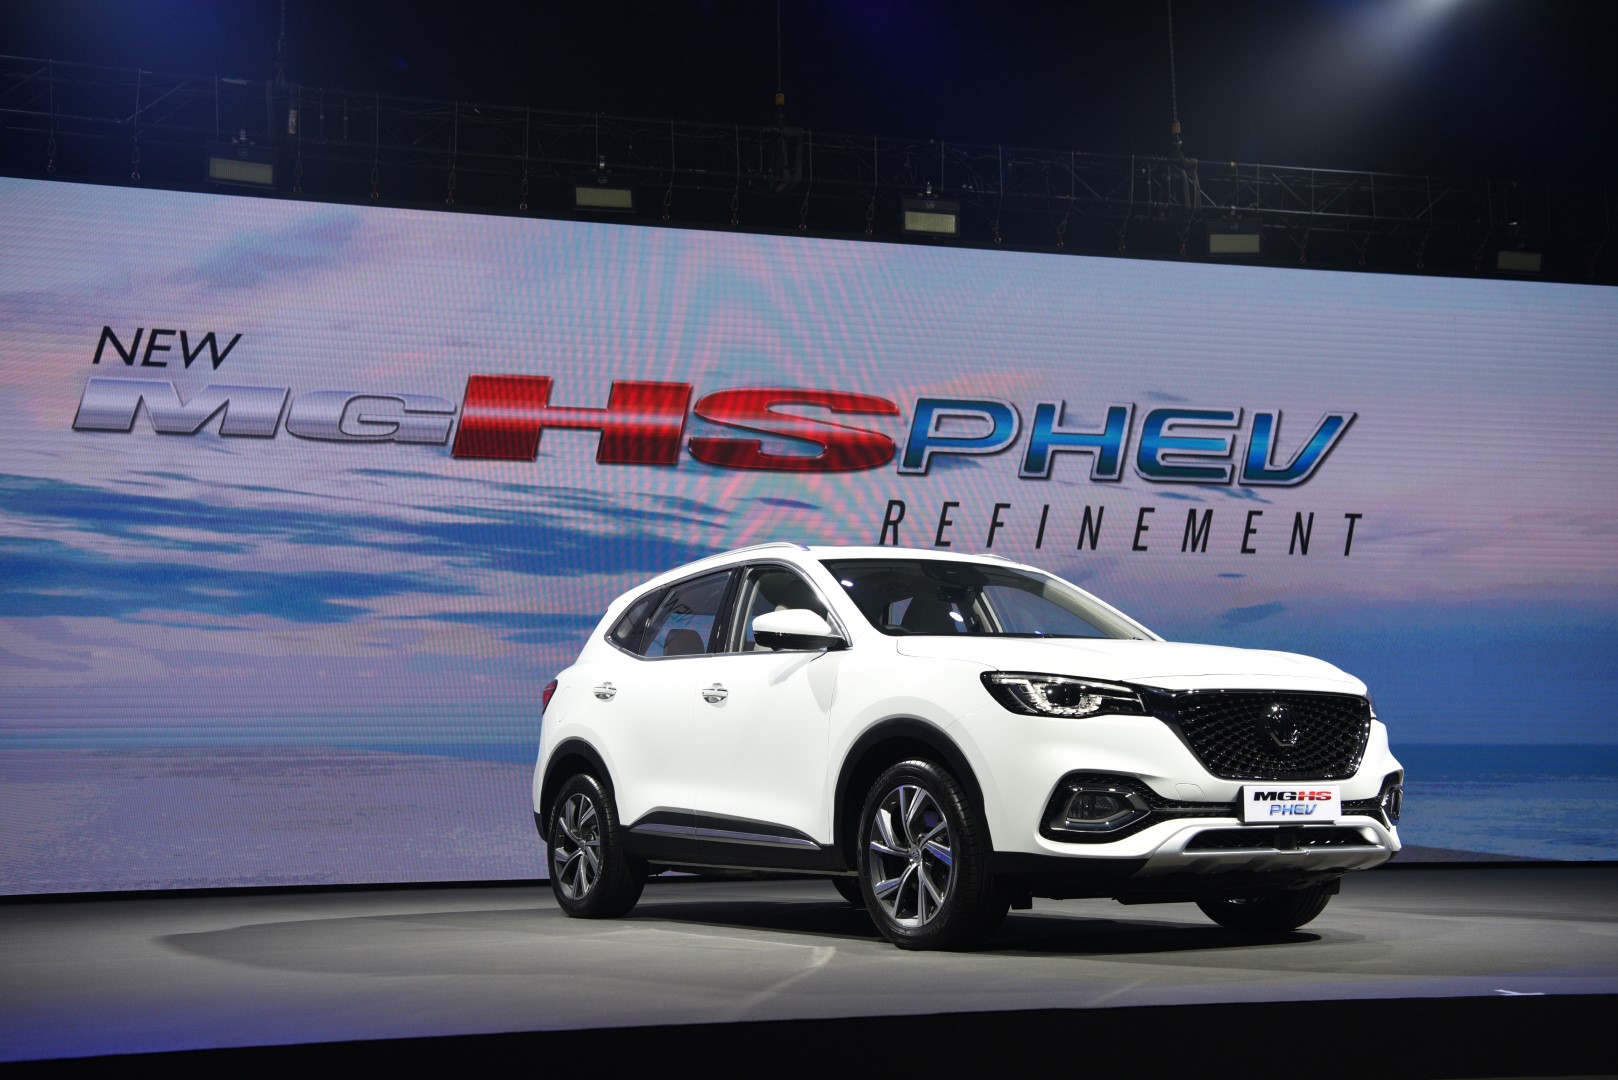 MG Launches NEW MG HS PHEV to Drive Every Value of Life in “REFINEMENT